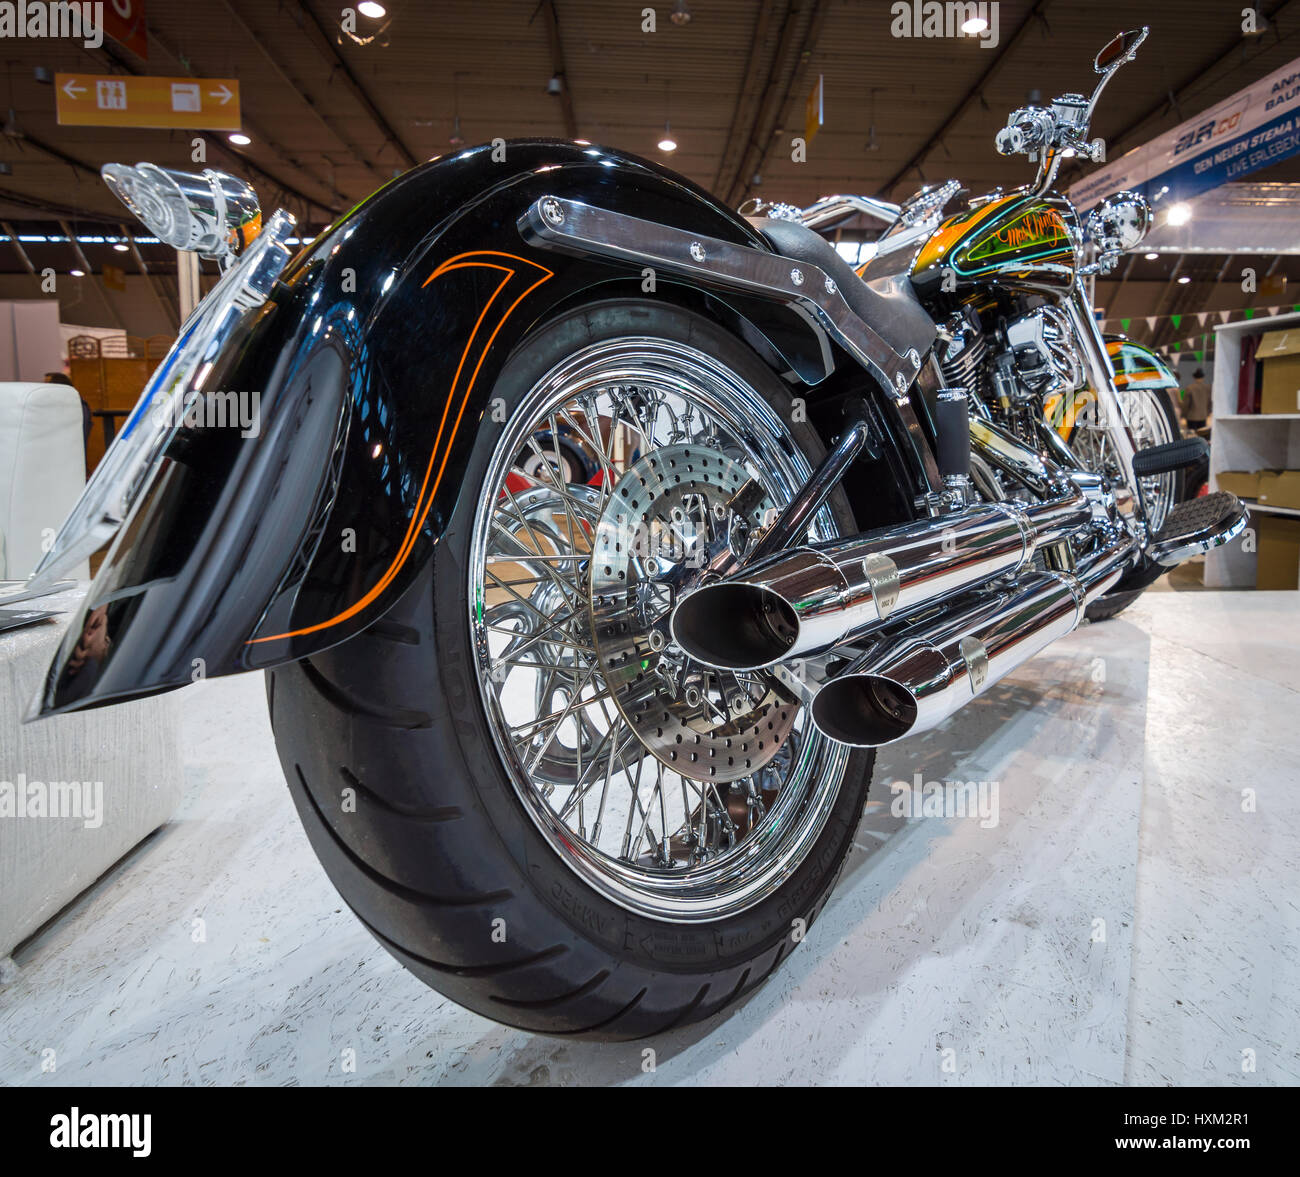 STUTTGART, GERMANY - MARCH 02, 2017: Classic motorcycle Harley-Davidson. Rear view. Europe's greatest classic car exhibition 'RETRO CLASSICS' Stock Photo